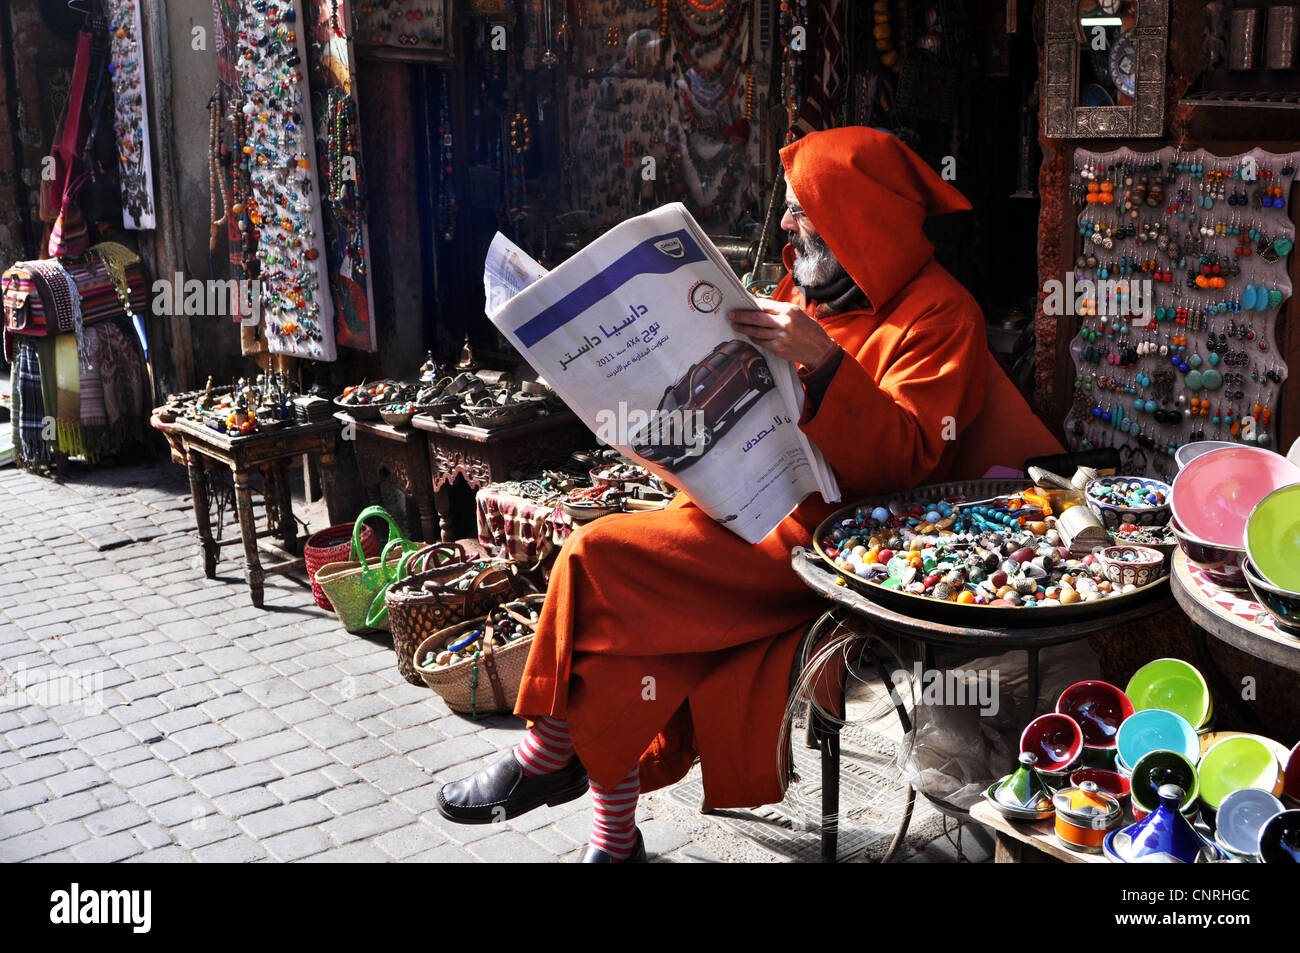 A Berber man in traditional clothing reads a newspaper, Marrakesh, Morocco Stock Photo